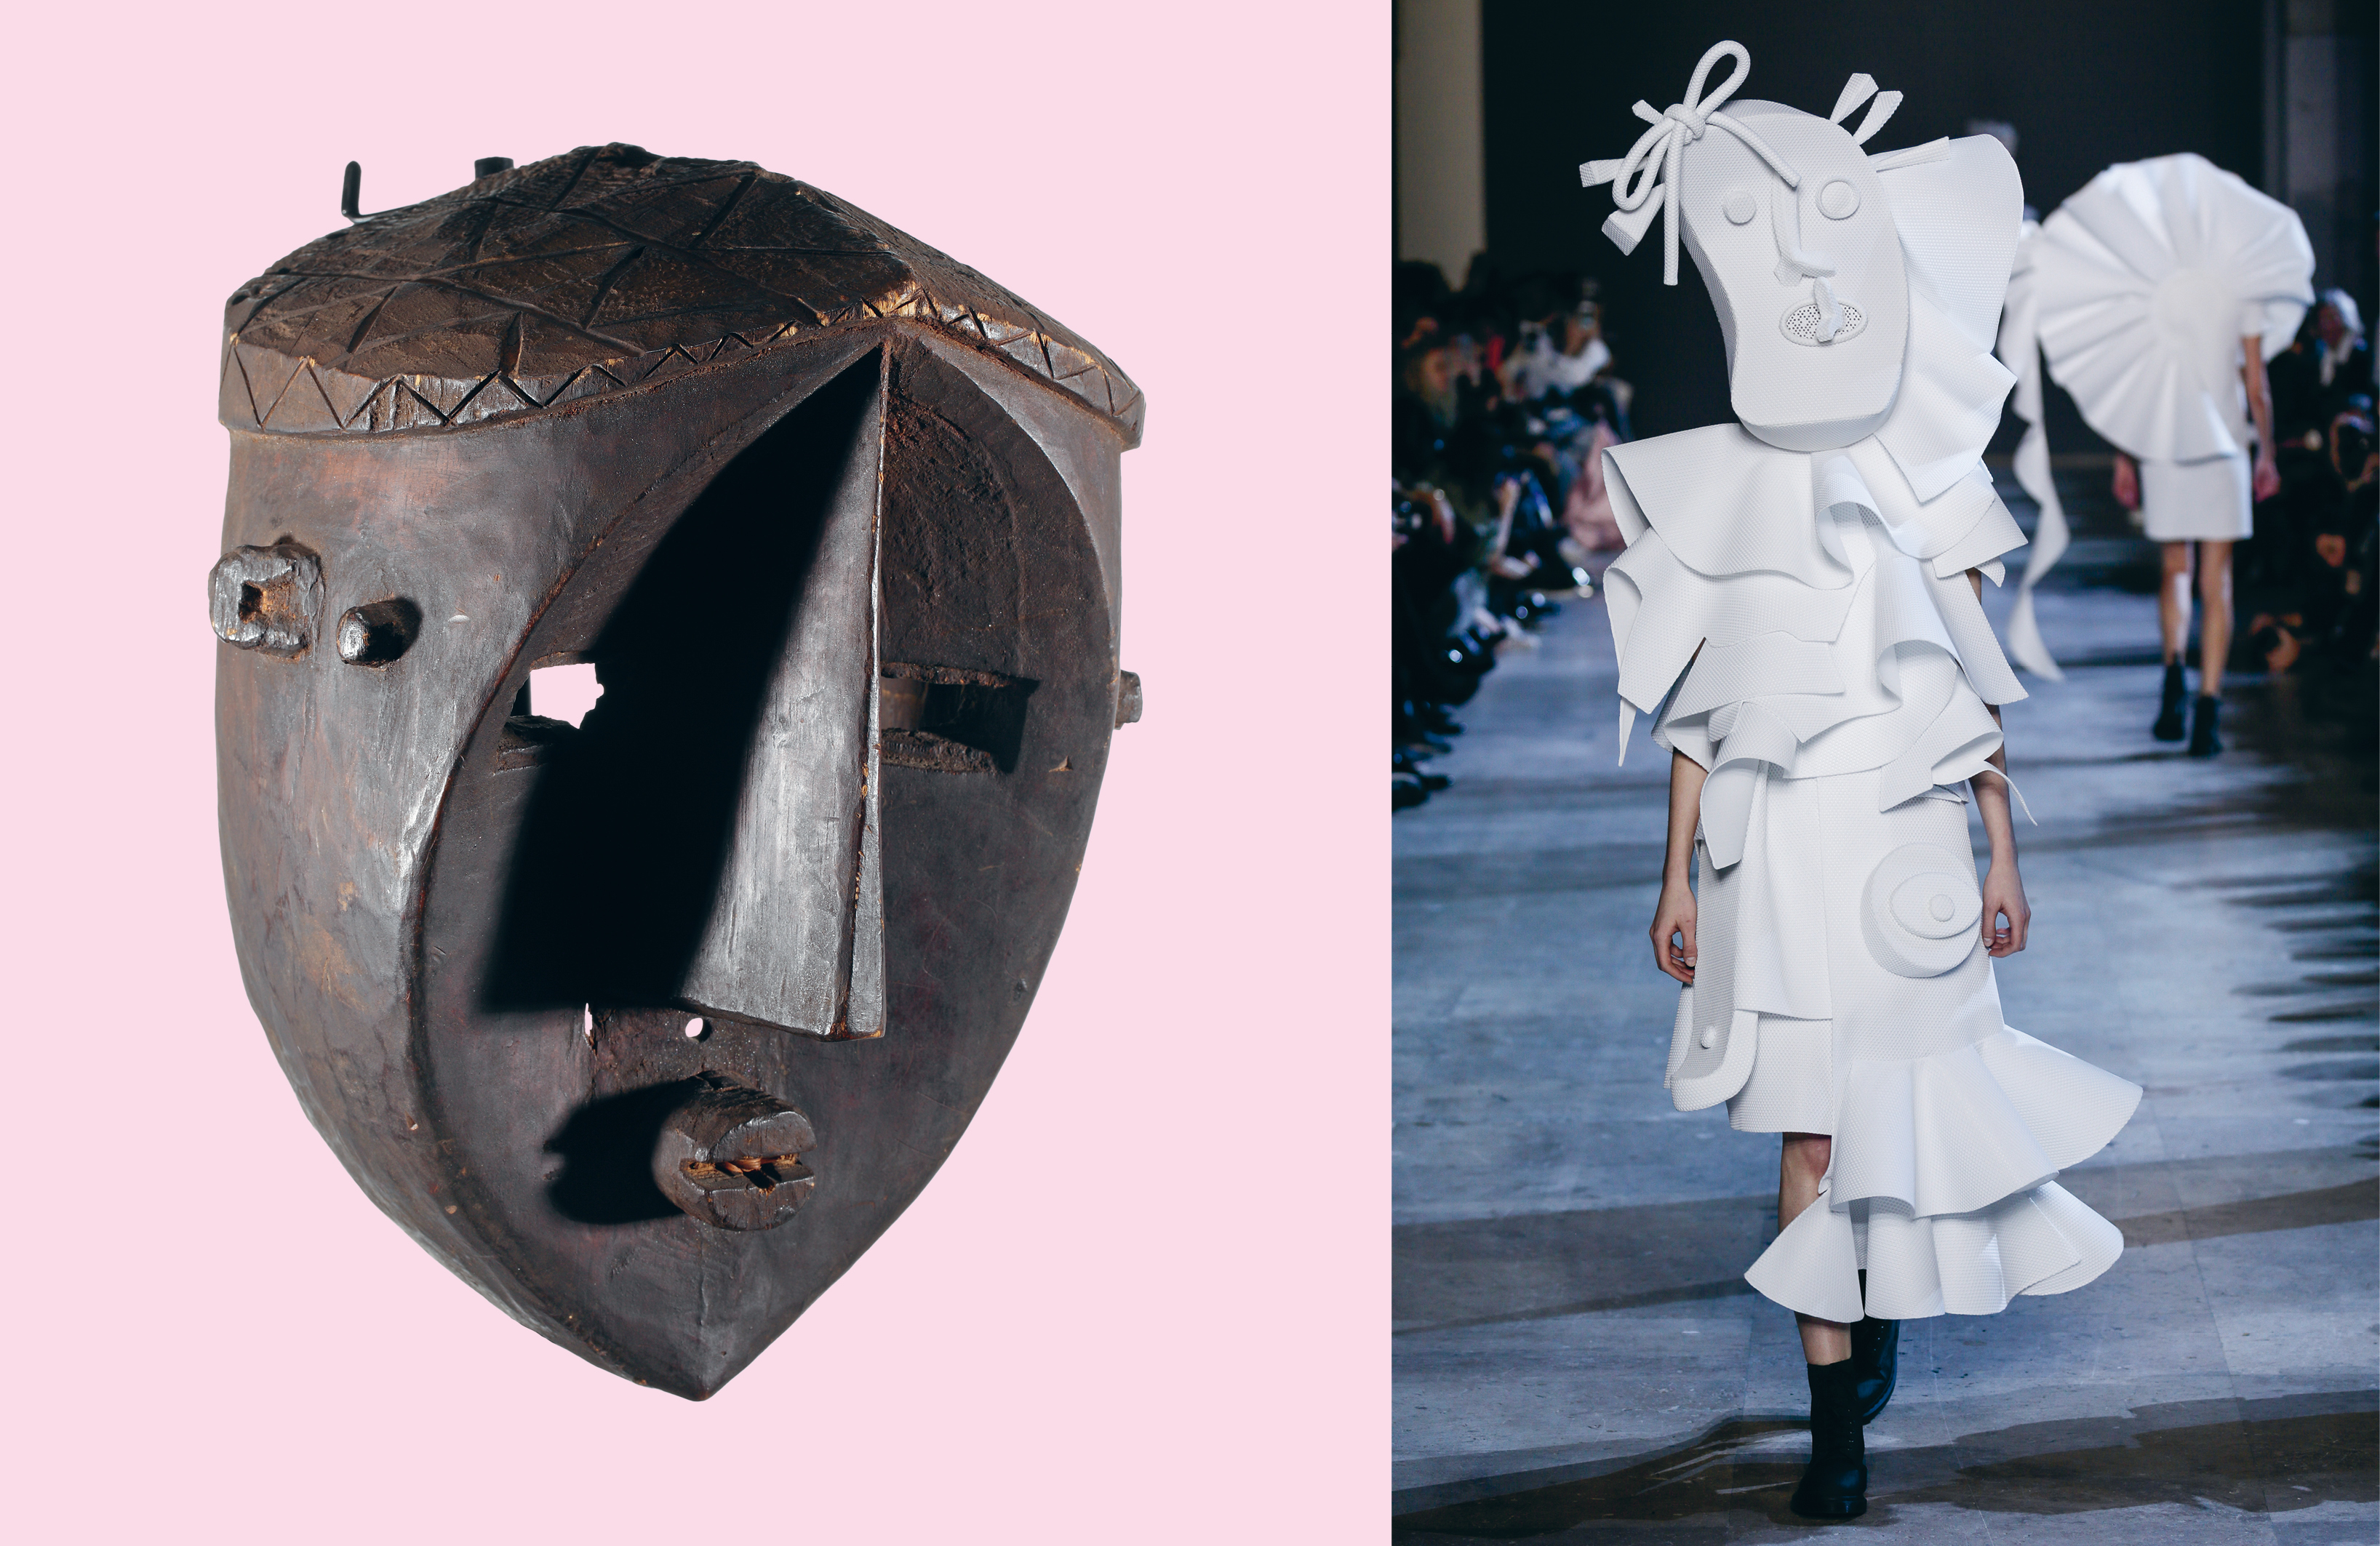 walter van beirendonck on the power, mystery and history of the mask